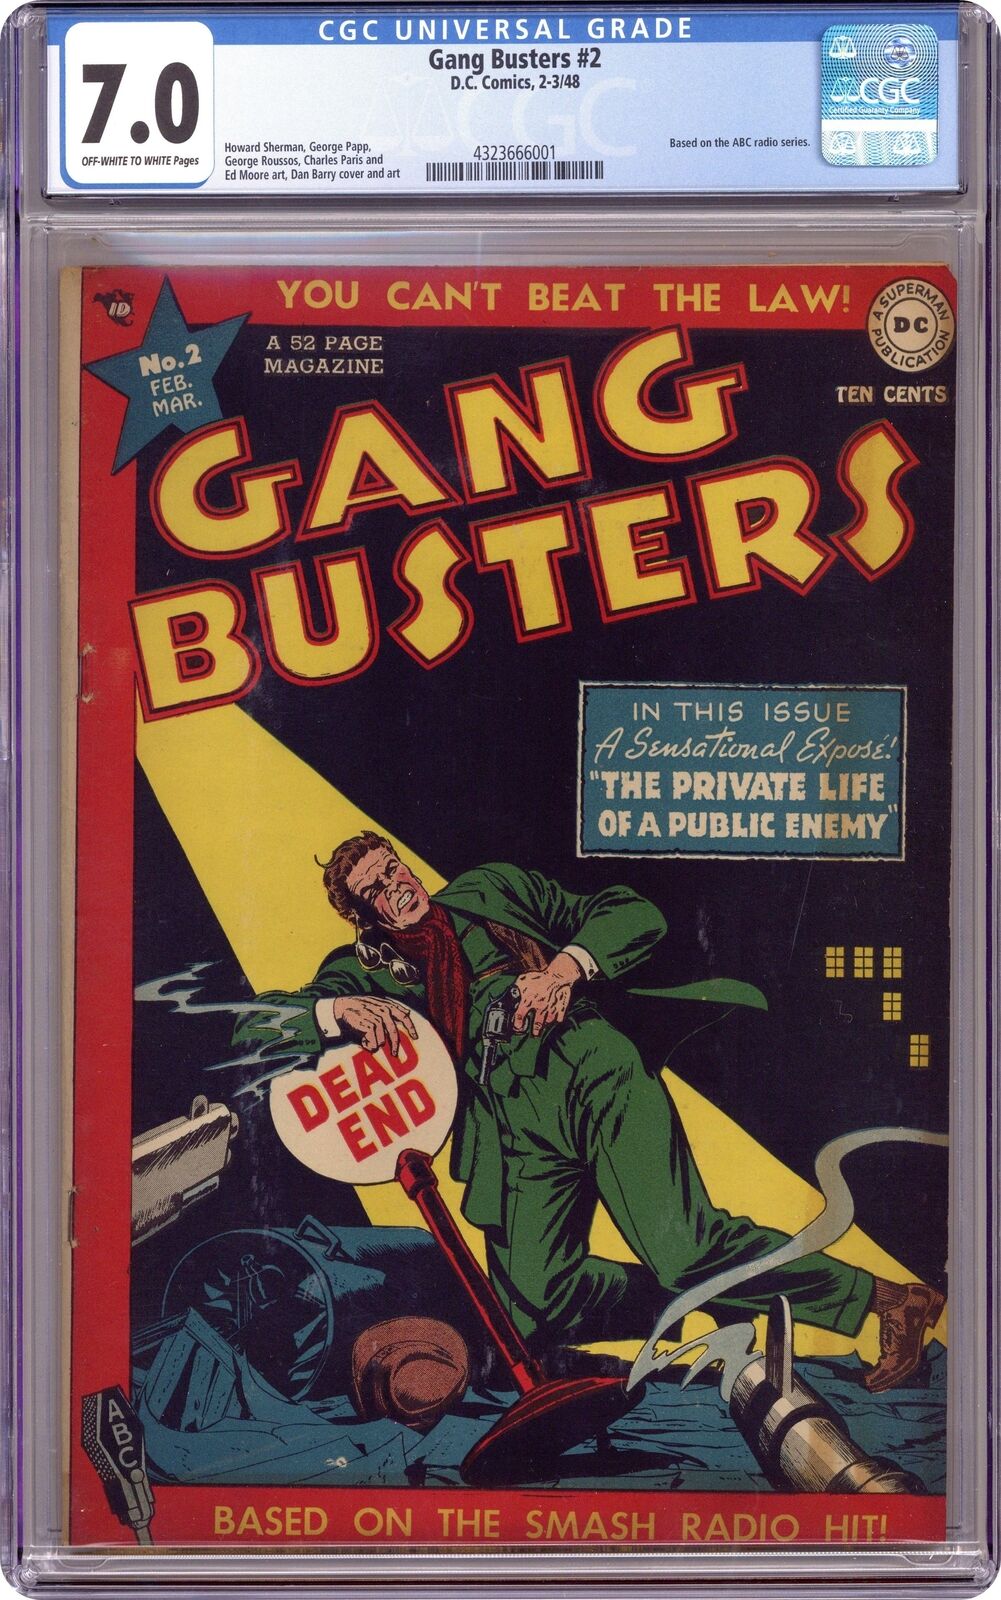 Gang Busters #2 CGC 7.0 1948 4323666001